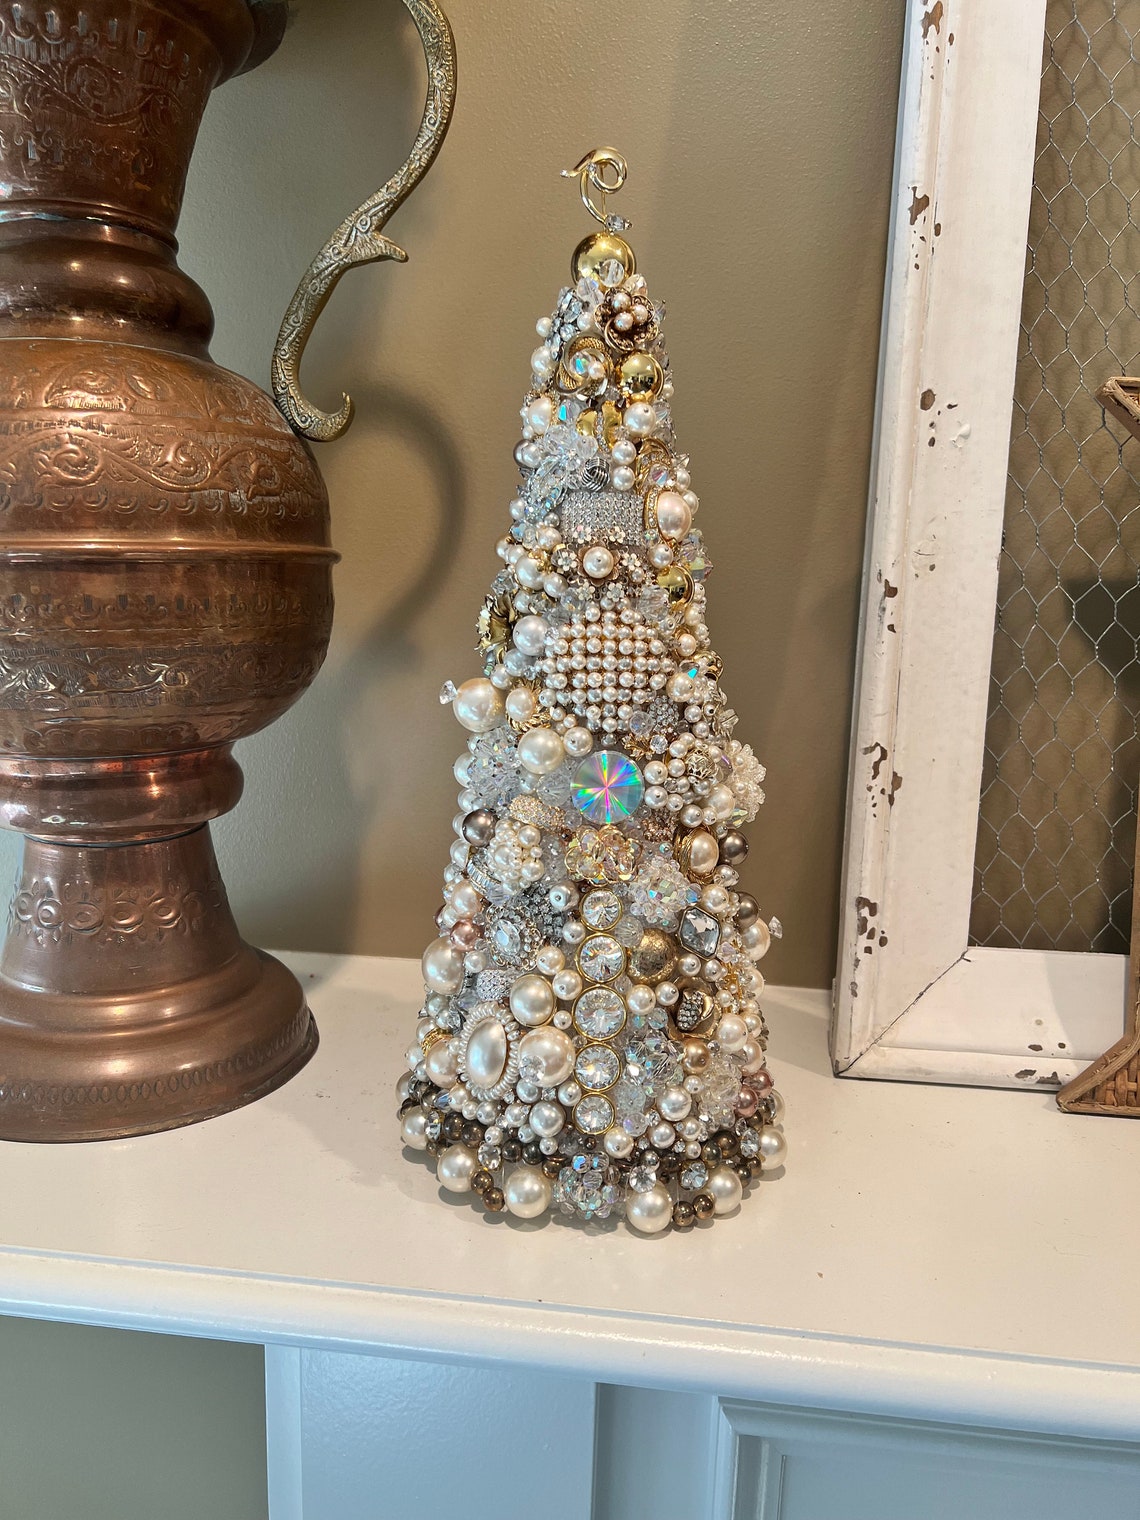 Made to Order Jeweled Tree 12 Inches Tall - Etsy